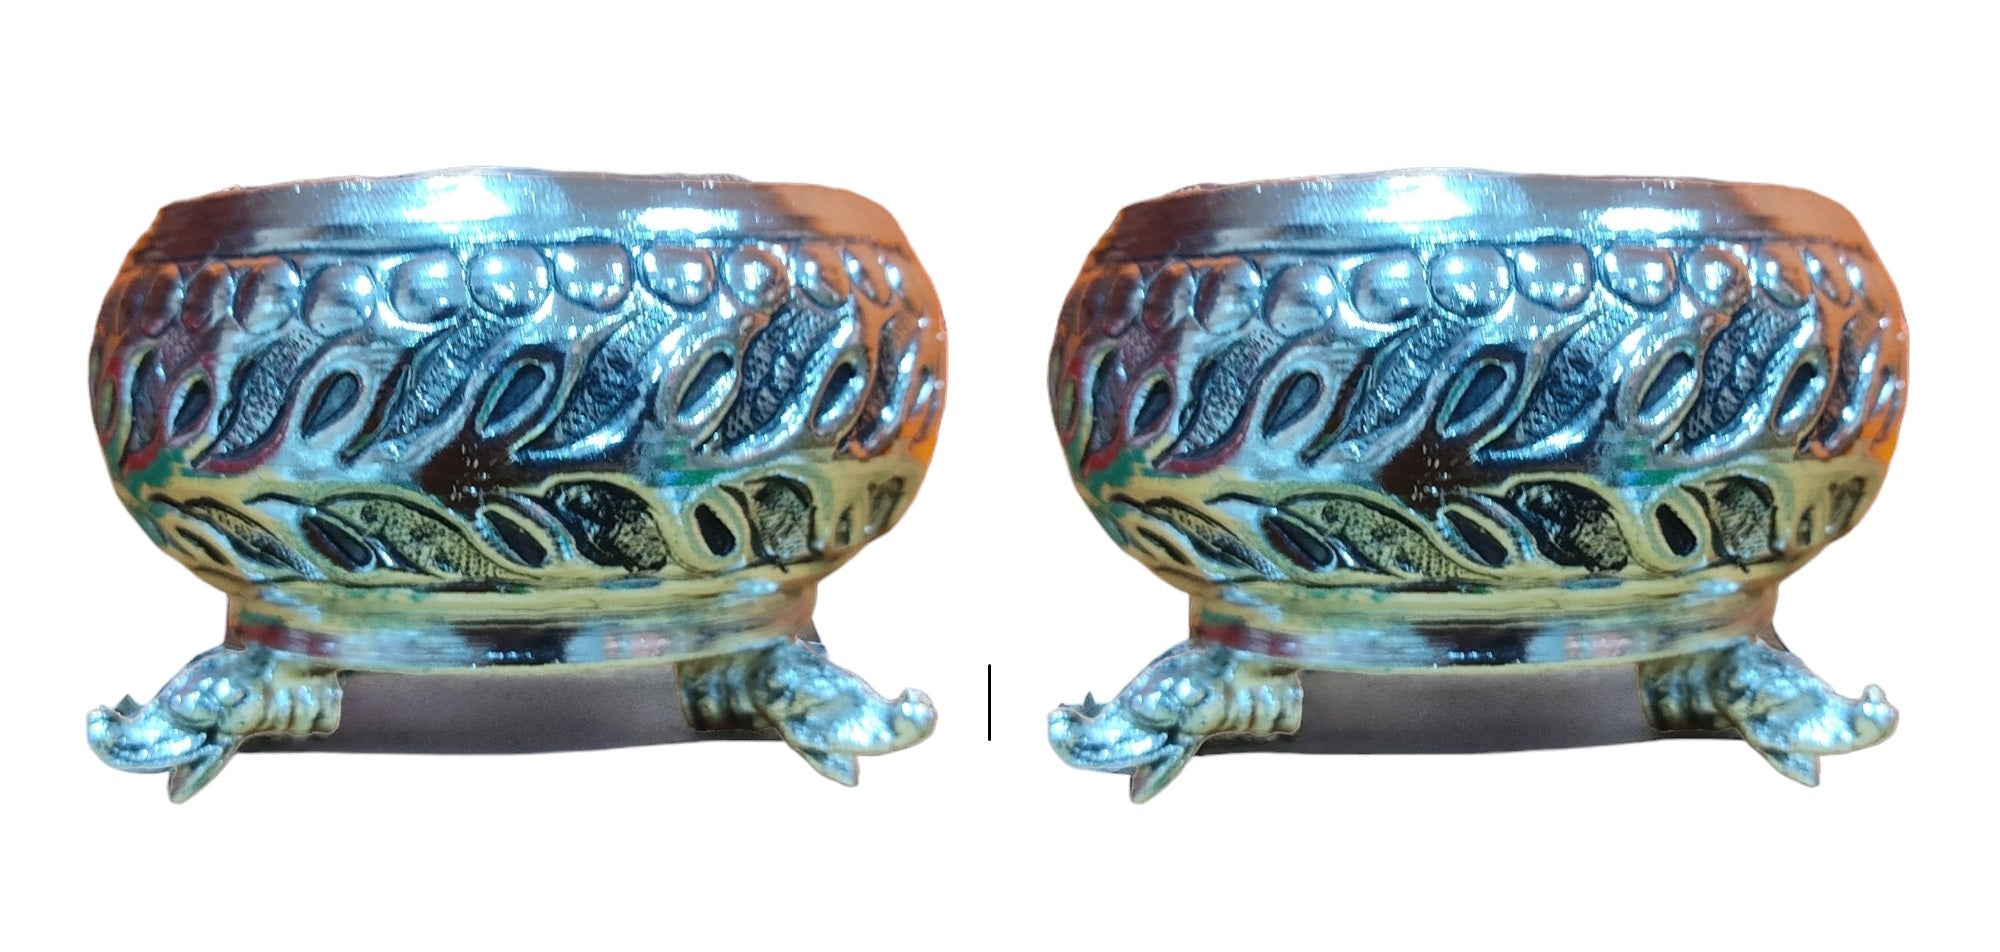 Sigaram Antique German Silver Kum Kum Cup With Lay For Home Pooja Decor K4390